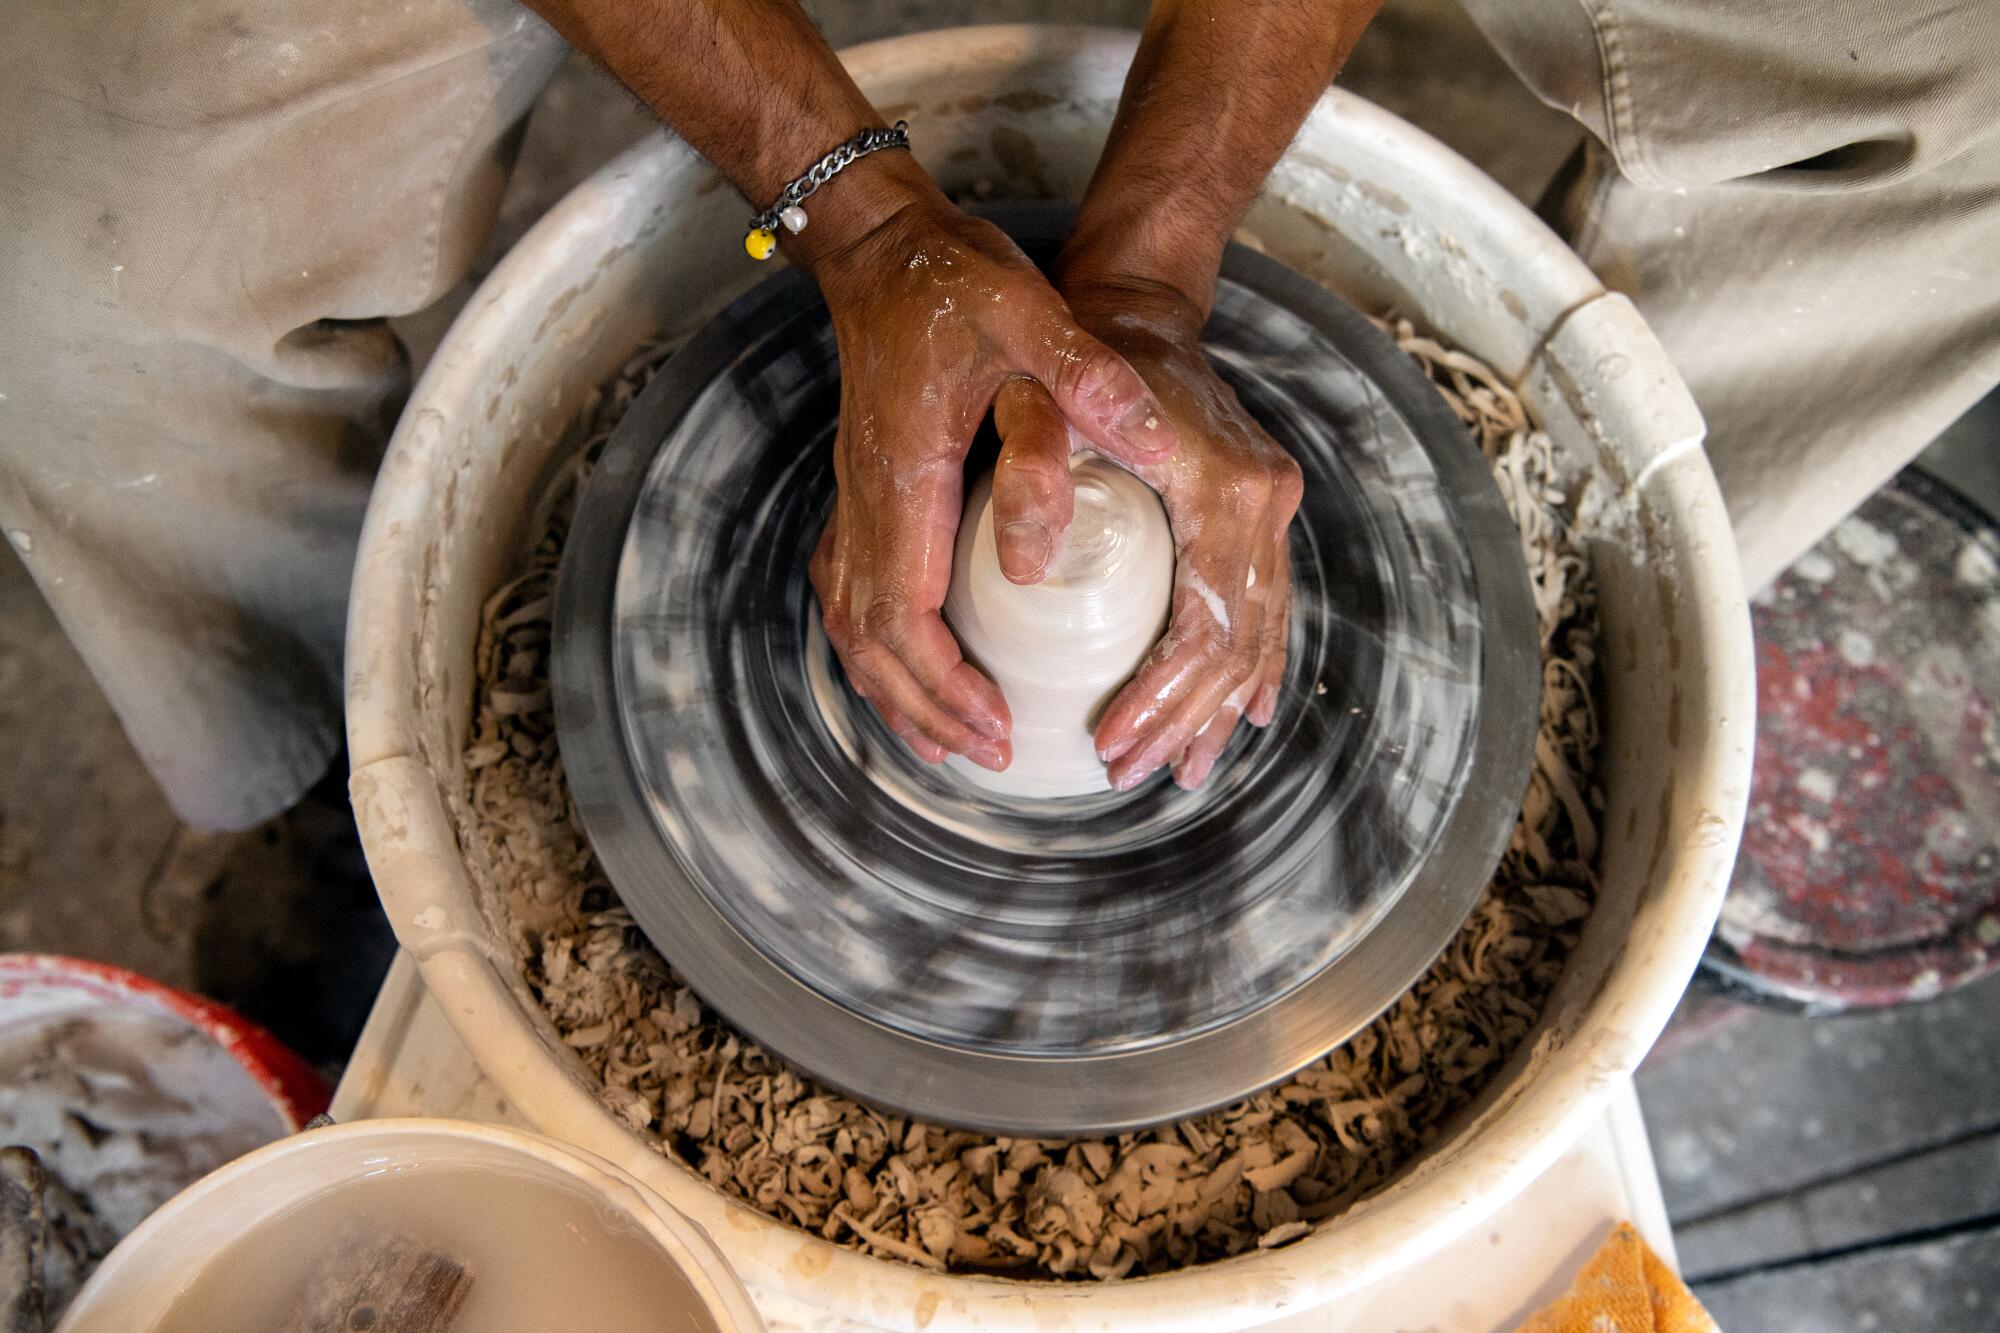 Hands on a pottery wheel shaping a ceramic piece